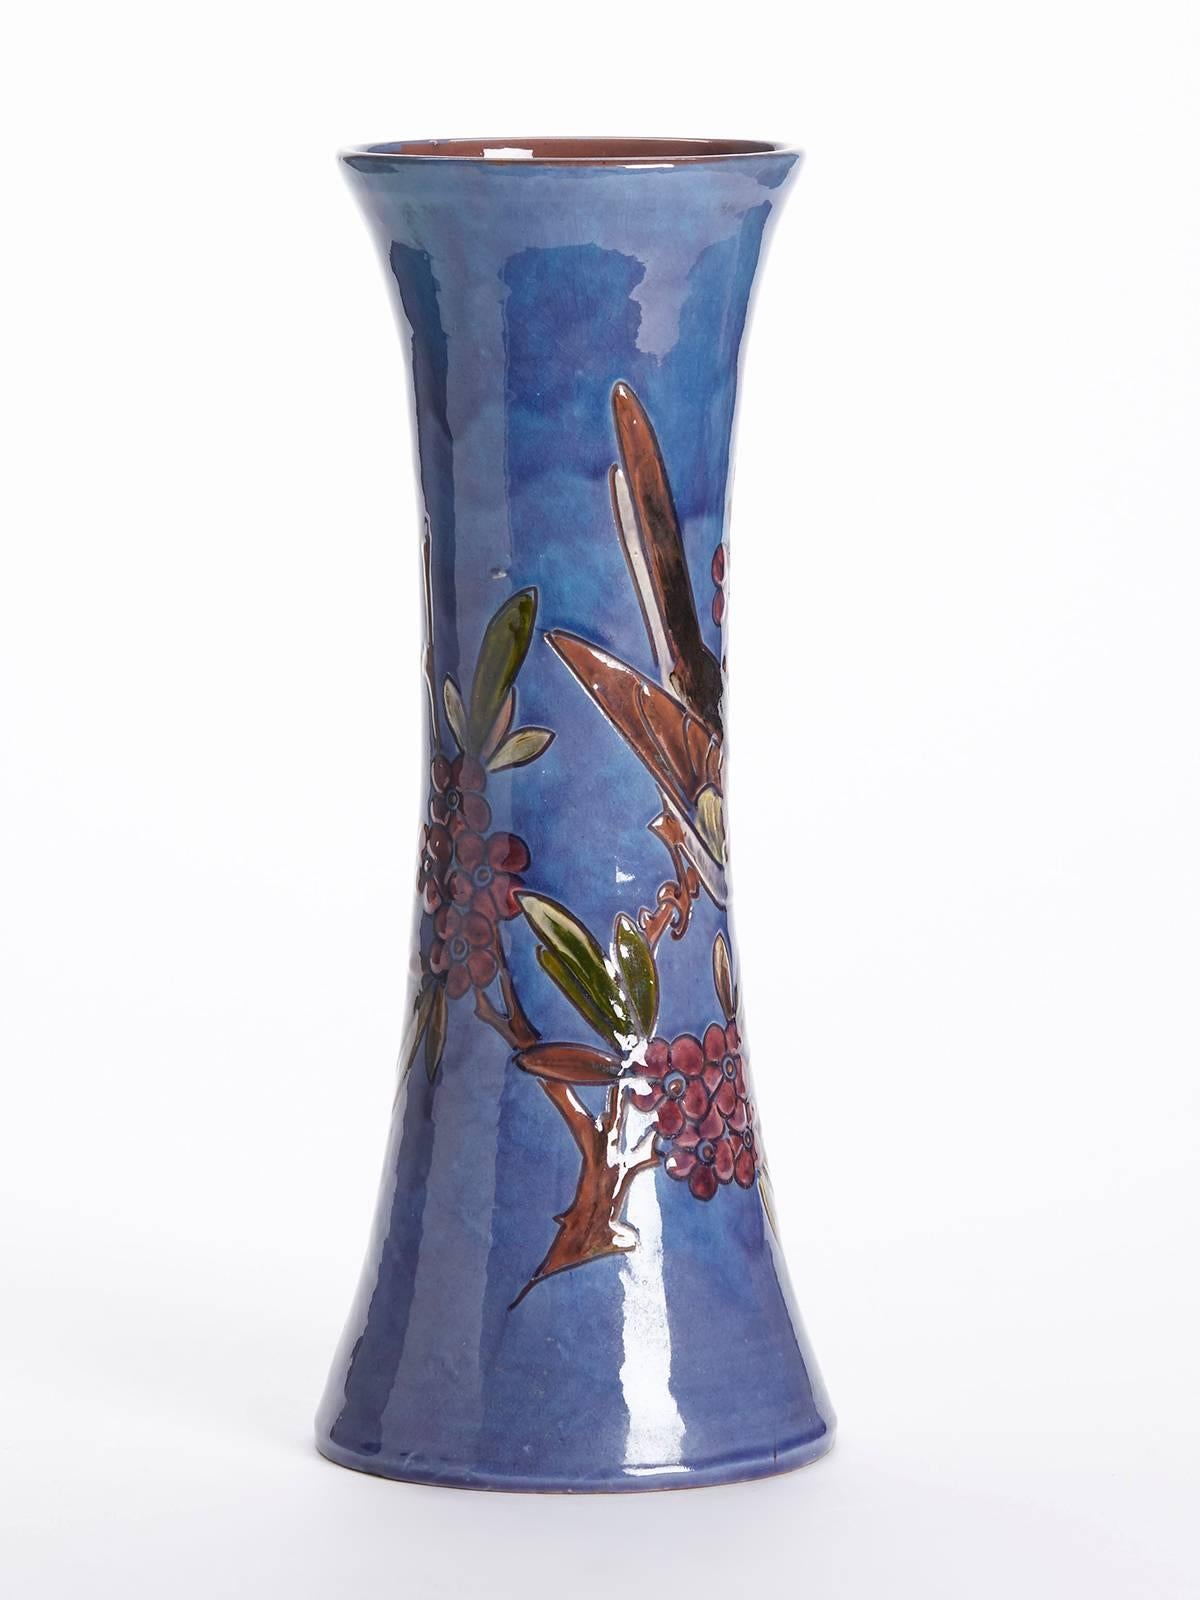 An unusual art pottery vase of trumpet shape decorated with a bird perched on a fruiting branch by William Baron. The tall waisted vase is incised and hand decorated and incised with a garden bird perched on a branch with berries painted in colours